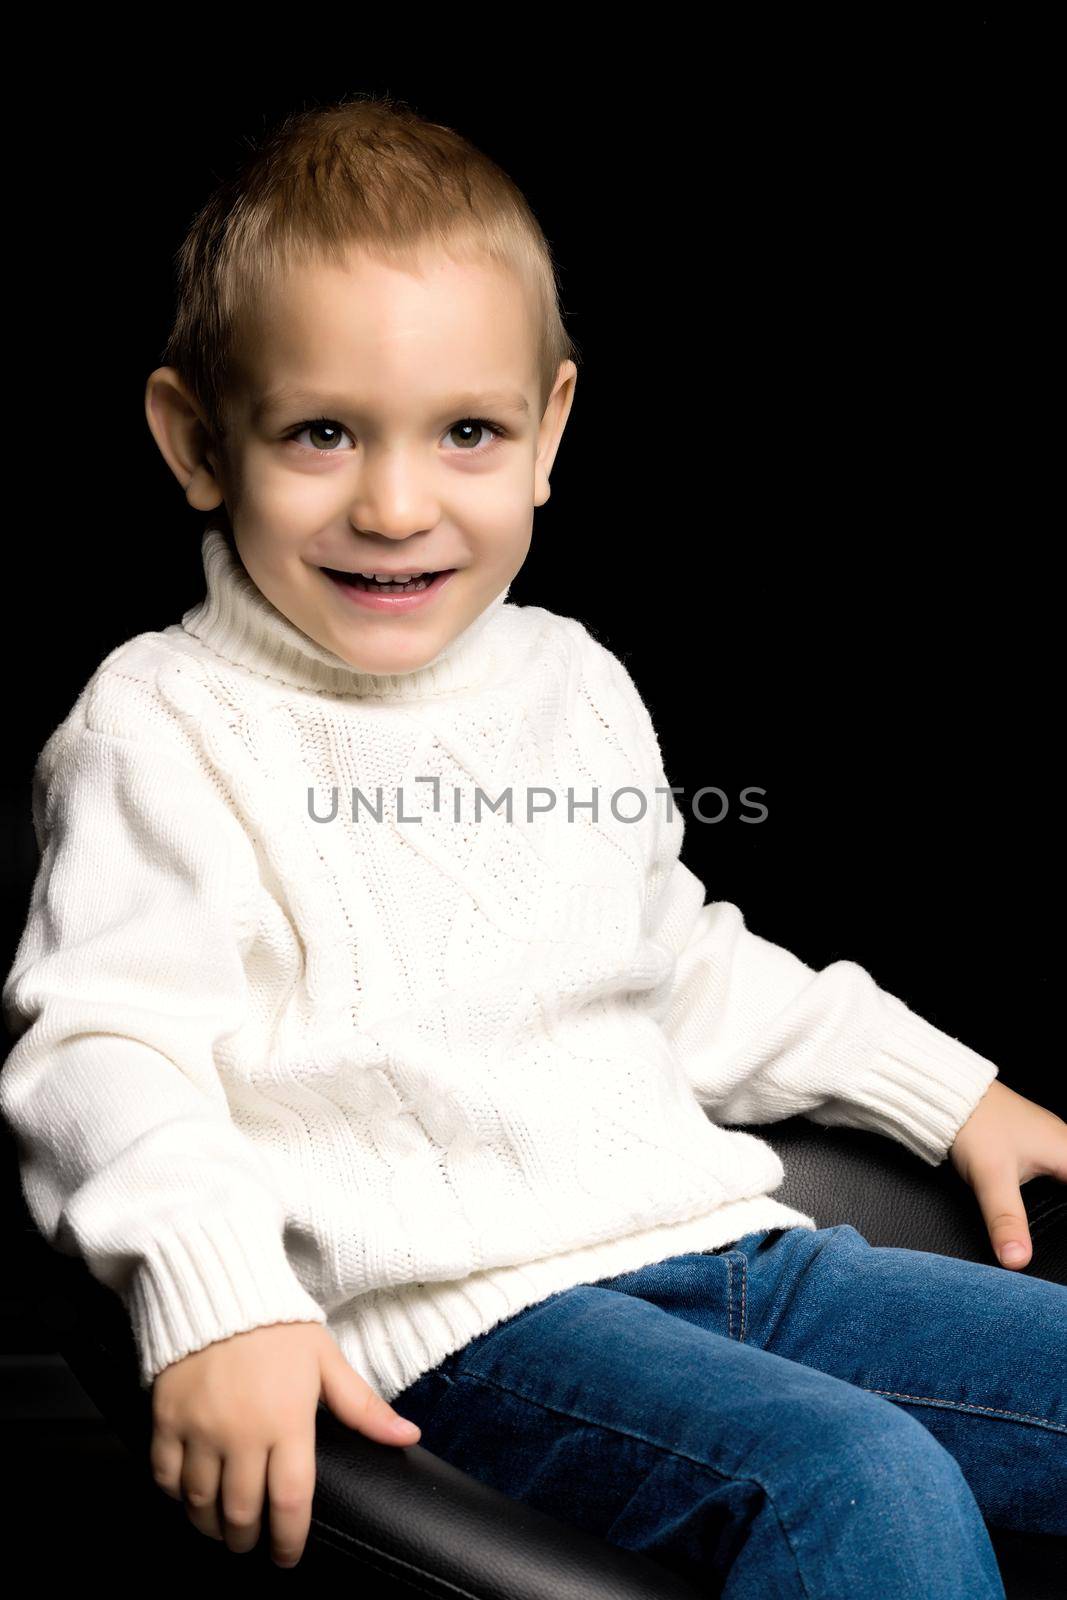 Cute little boy sitting on the armchair in the studio on a black background. The concept of family and people.